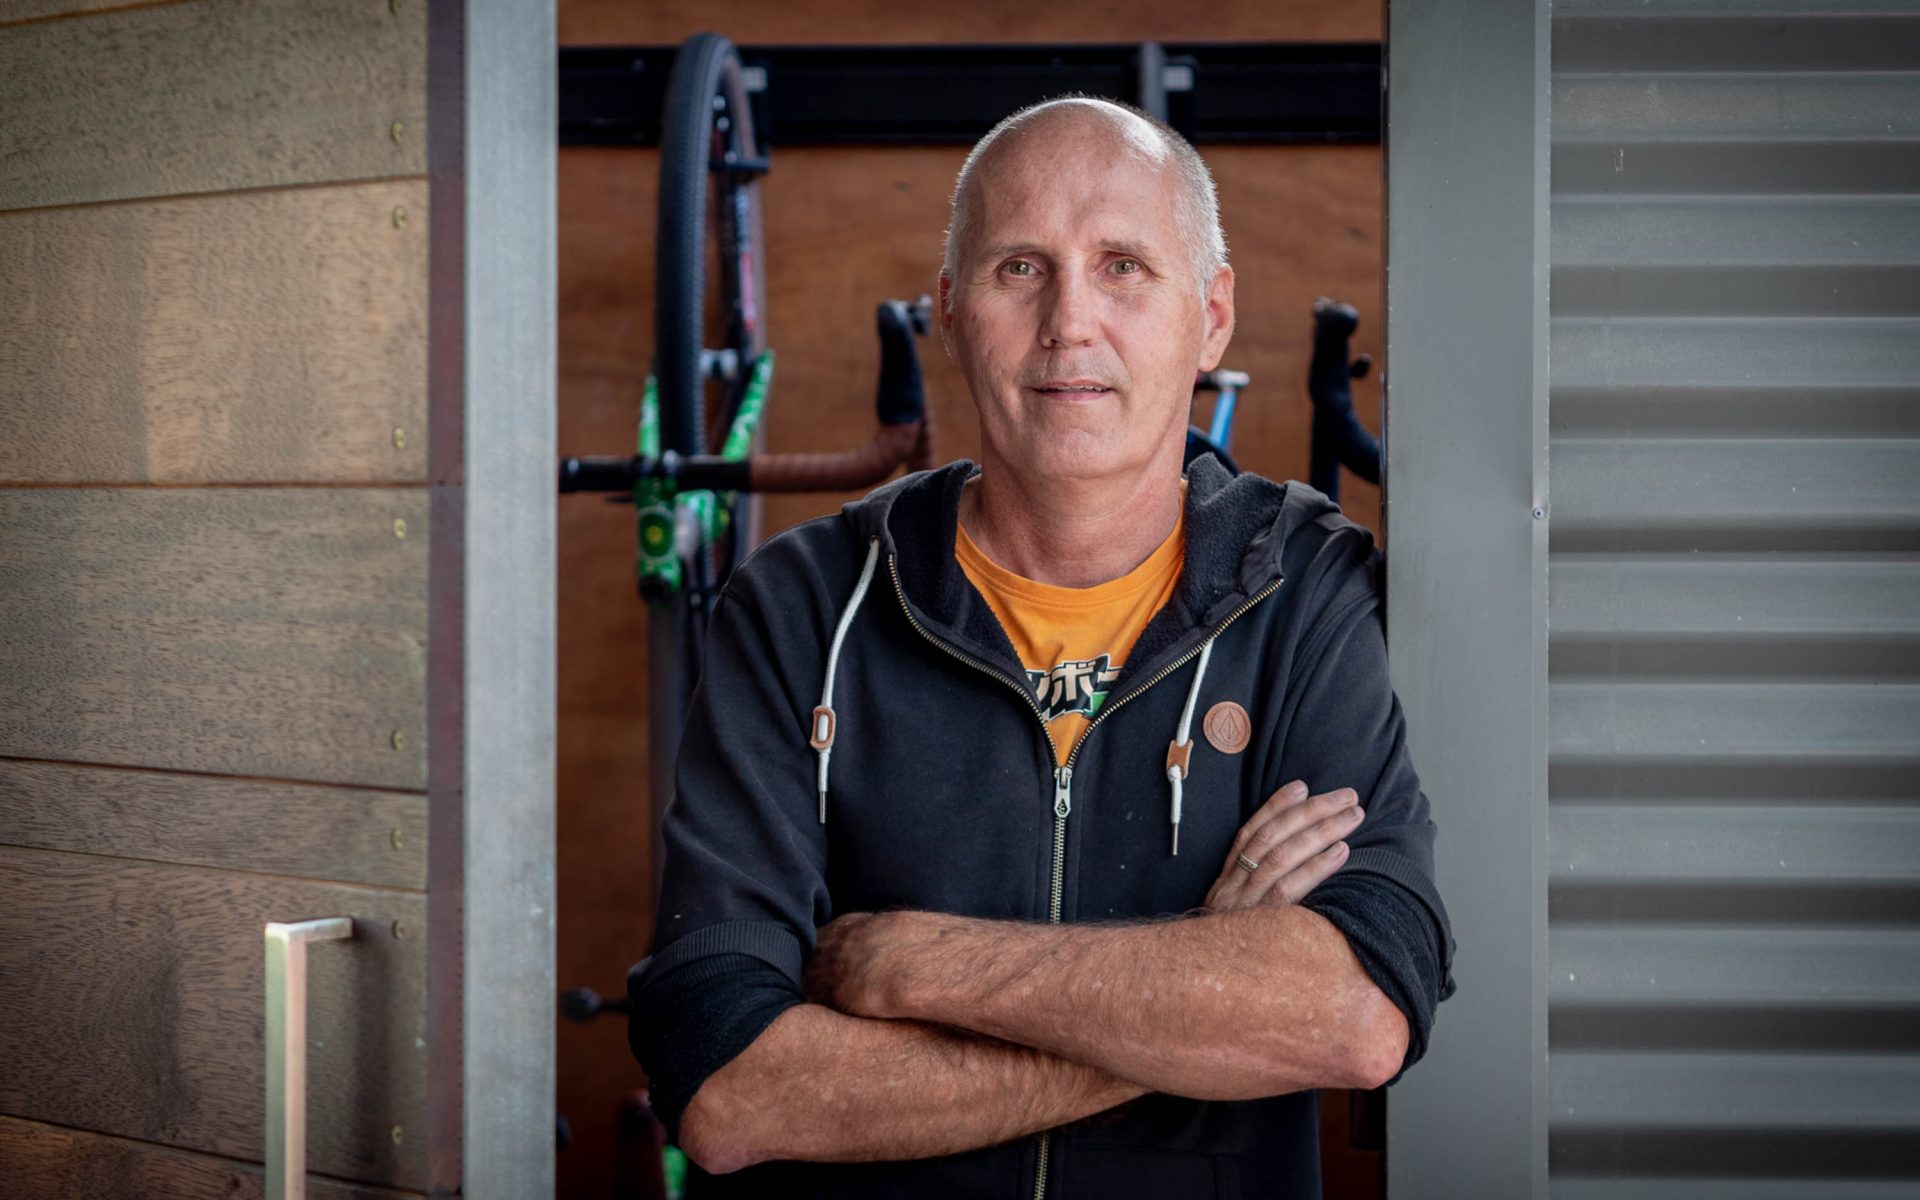 Matt Wikstrom portrait. He stands in a doorway facing the camera, arms crossed, and is wearing a dark grey/black hoodie over a bright yellow t-shirt. In the room behind him are several bikes.